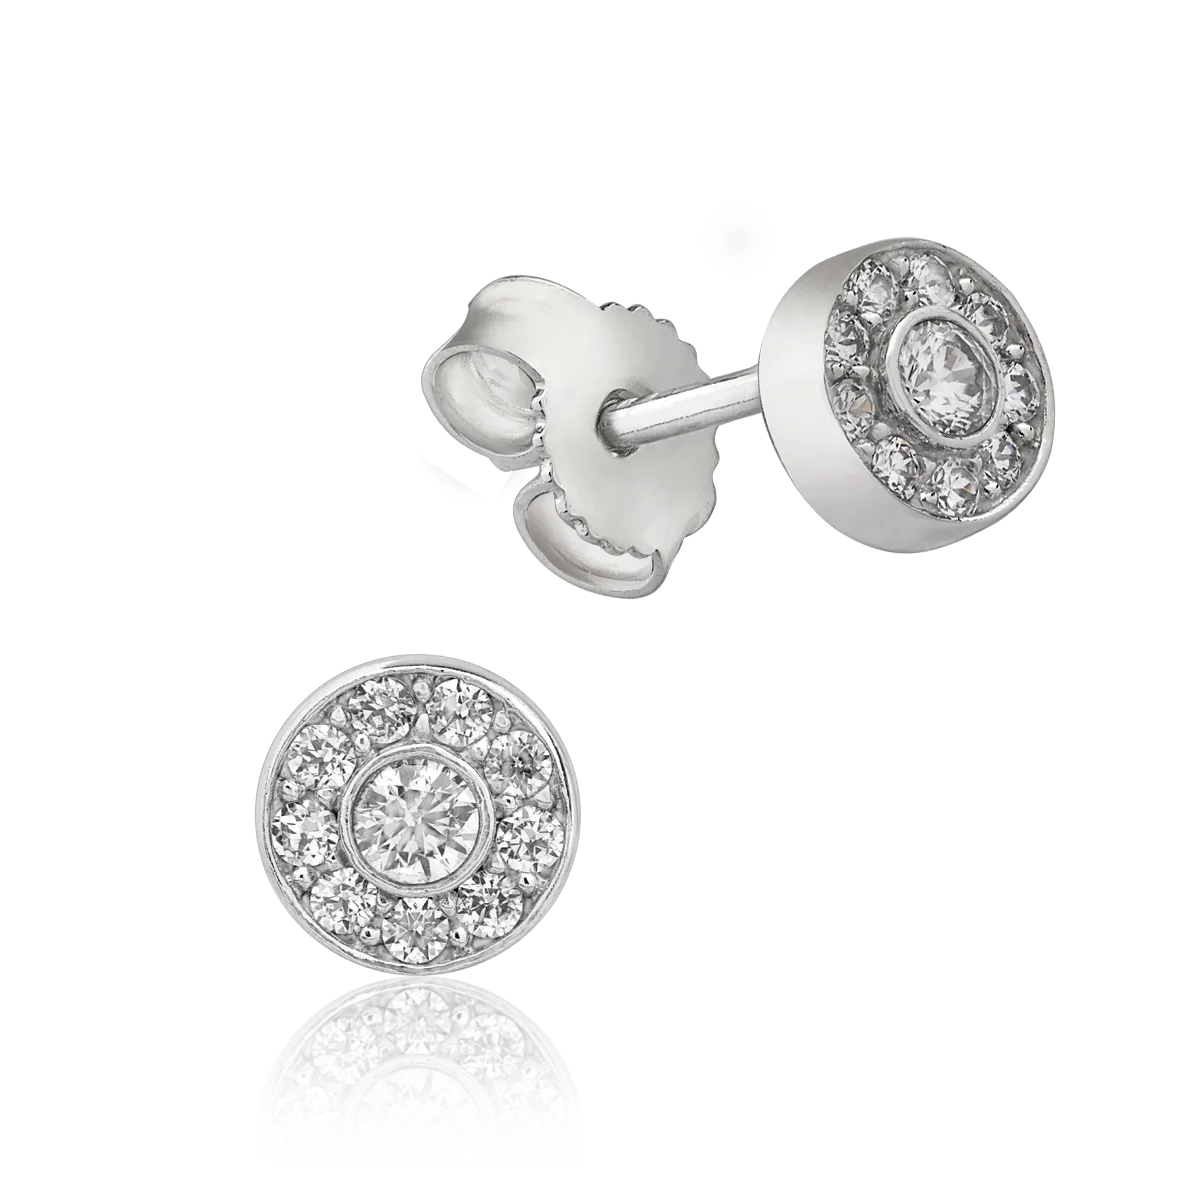 White gold round stud earrings with microsetting zirconia